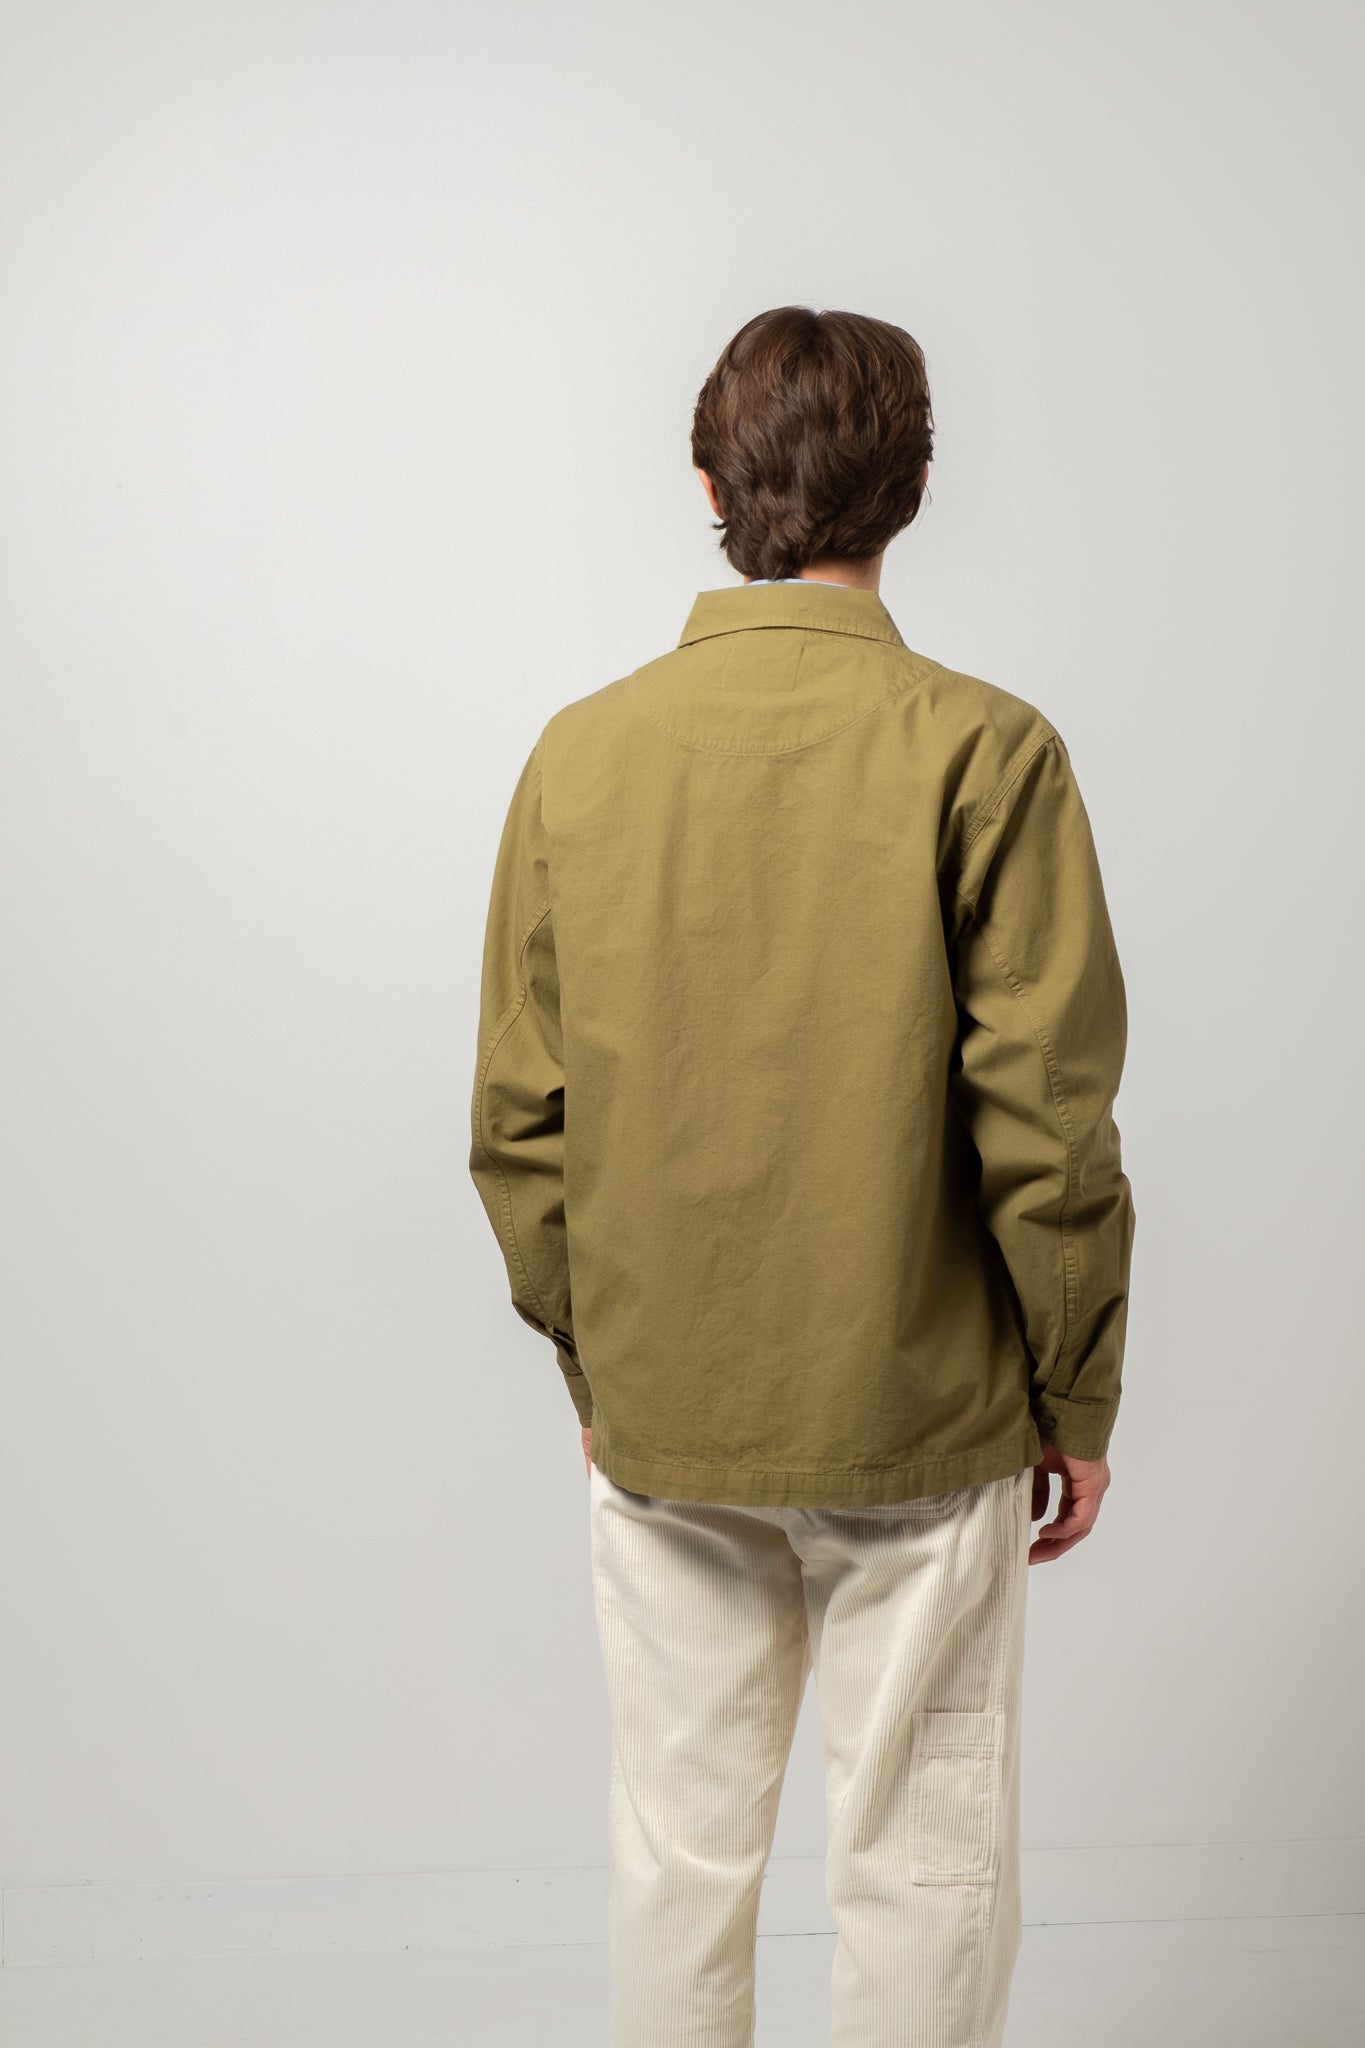 Redford Ripstop Jacket - Light Military